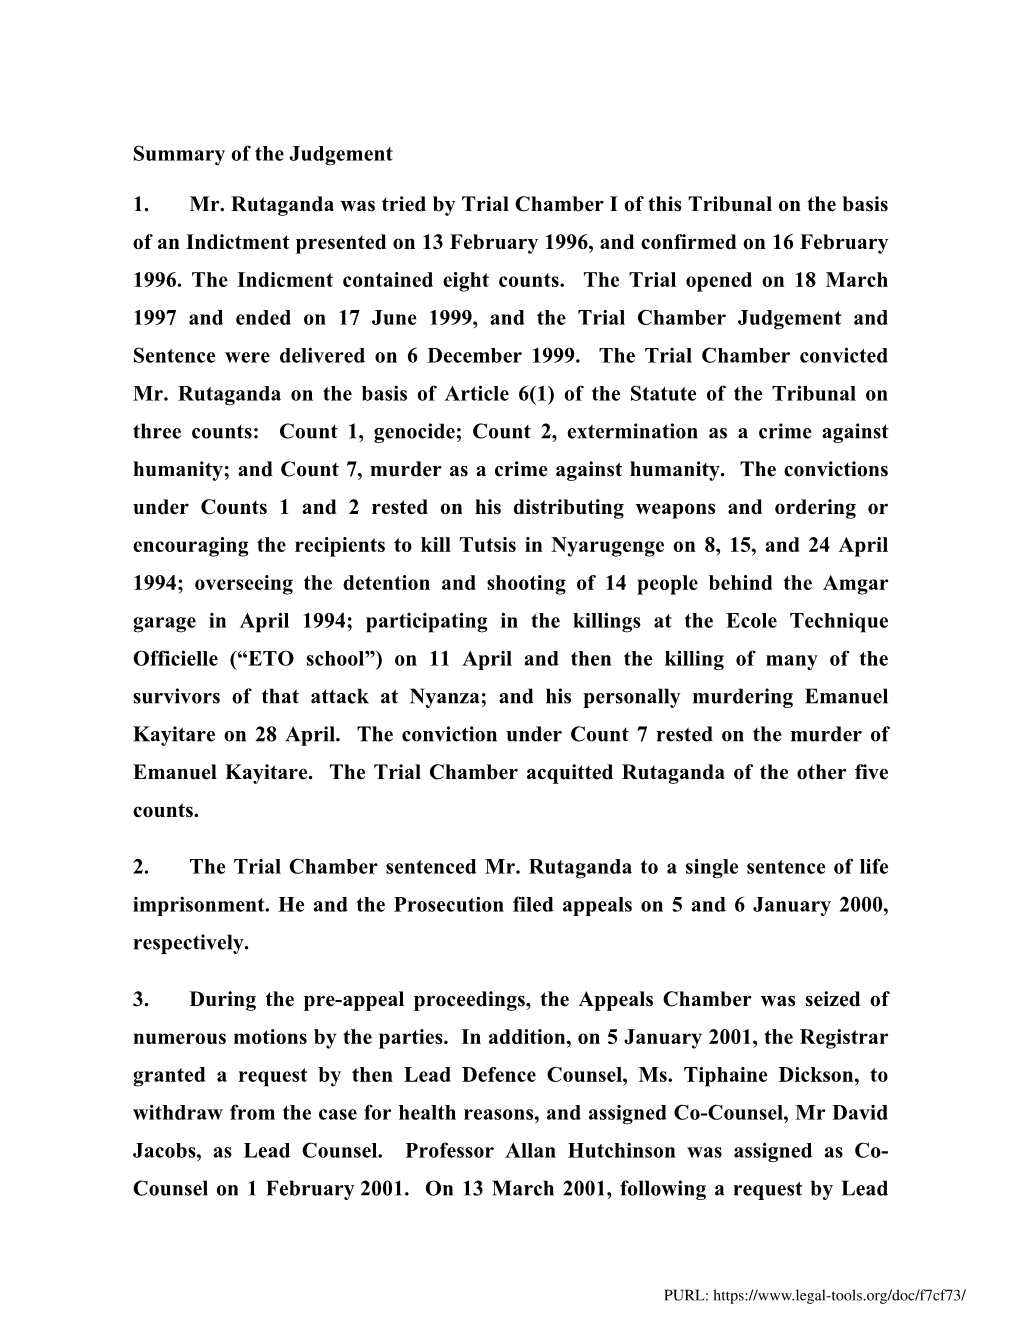 Summary of the Judgement 1. Mr. Rutaganda Was Tried by Trial